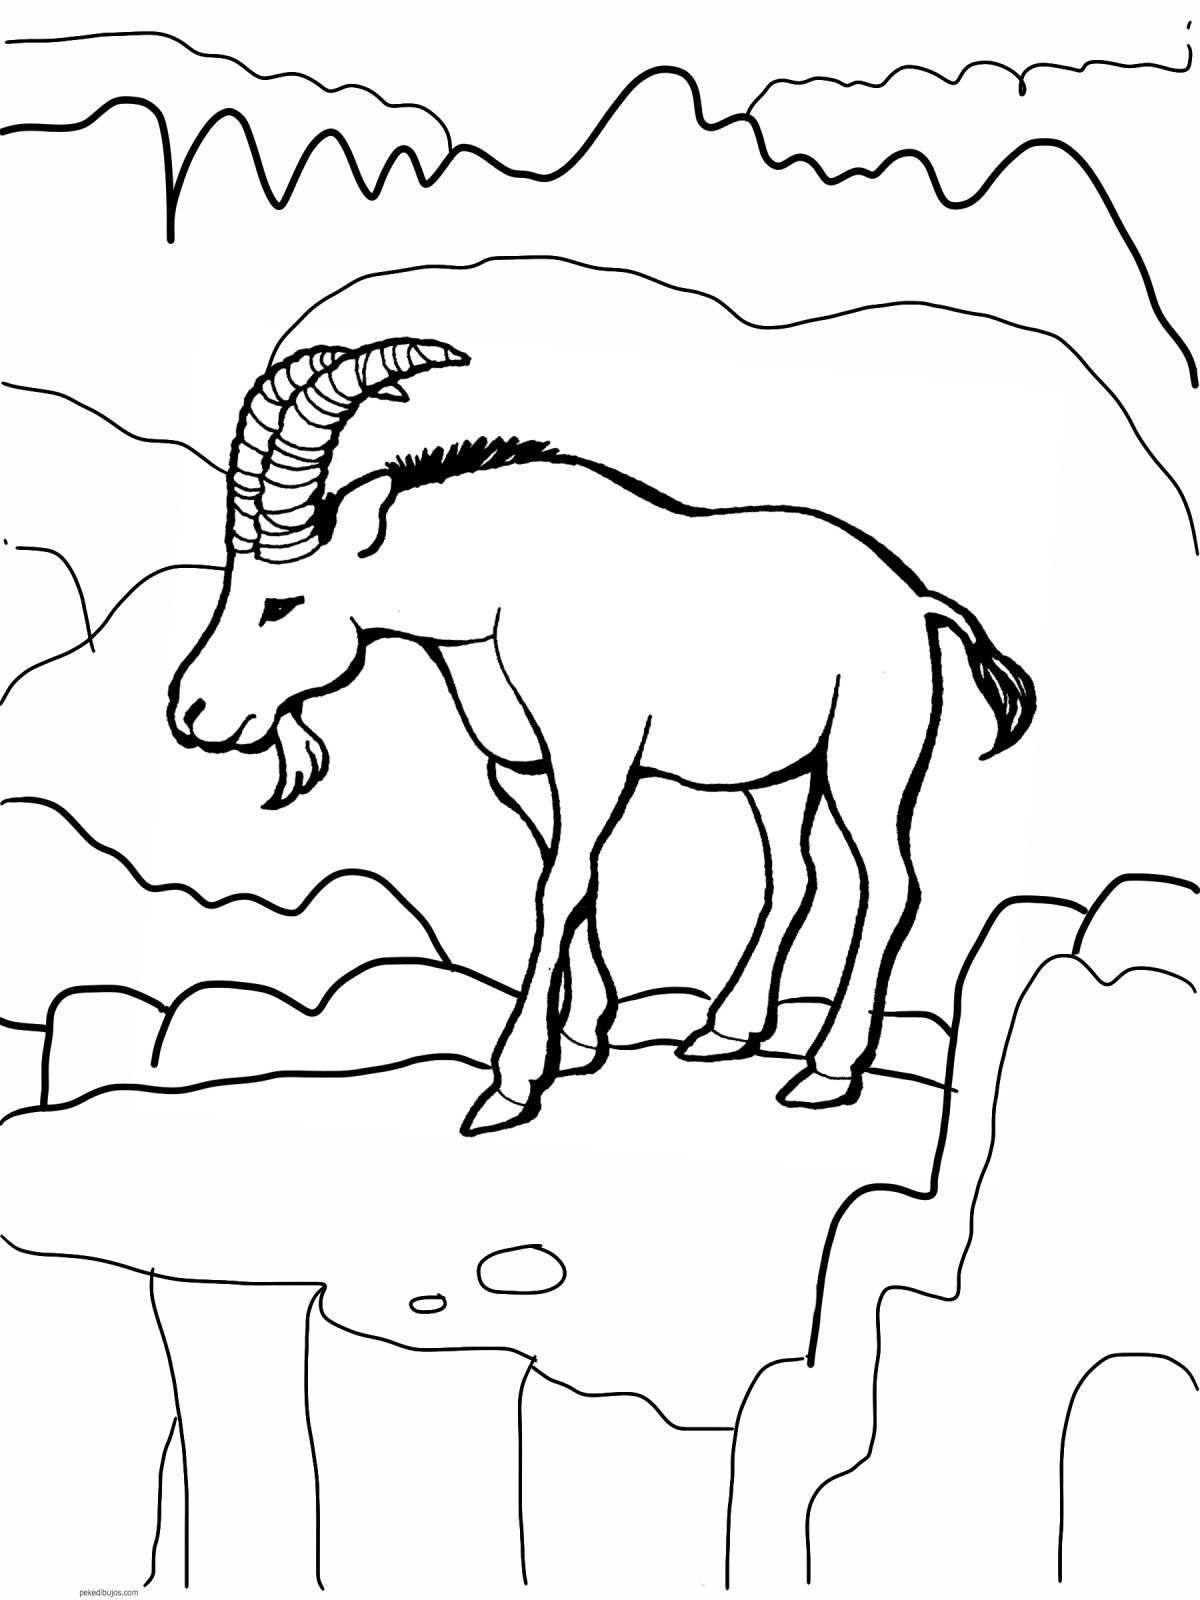 Coloring book cheerful mountain goat